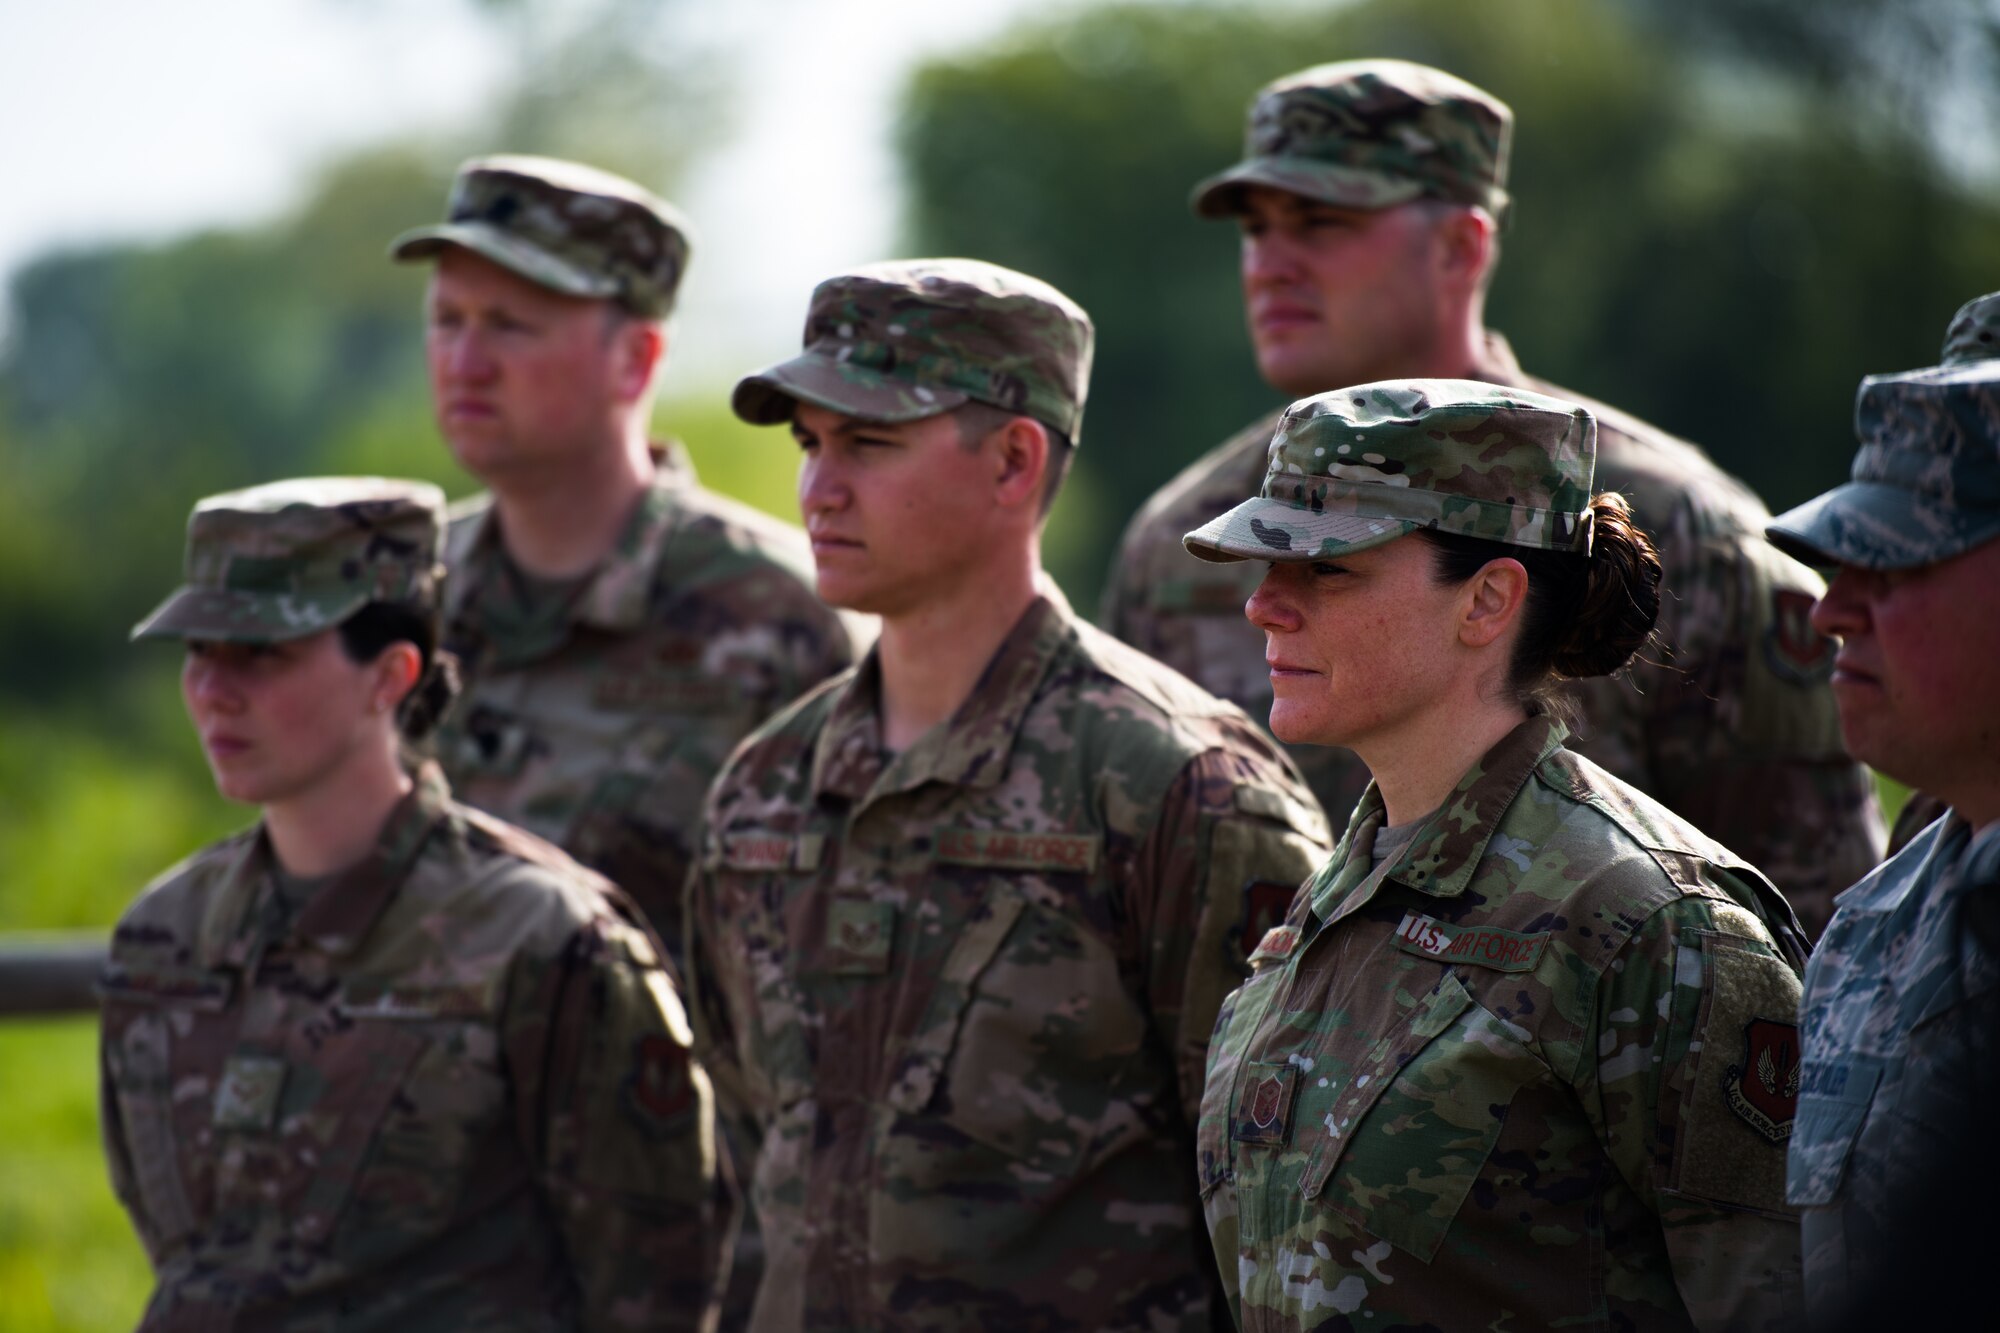 U.S. Air Force Airmen assigned to the 435th Construction Training Squadron, stand at parade rest during a ceremony at a WWII memorial in Picauville, France, May 1, 2019. The mayor of Picauville and the organization that oversees the memorial recognized and gave thanks to the Airmen who refurbished the memorial. (U.S. Air Force photo by Staff Sgt. Devin Boyer)